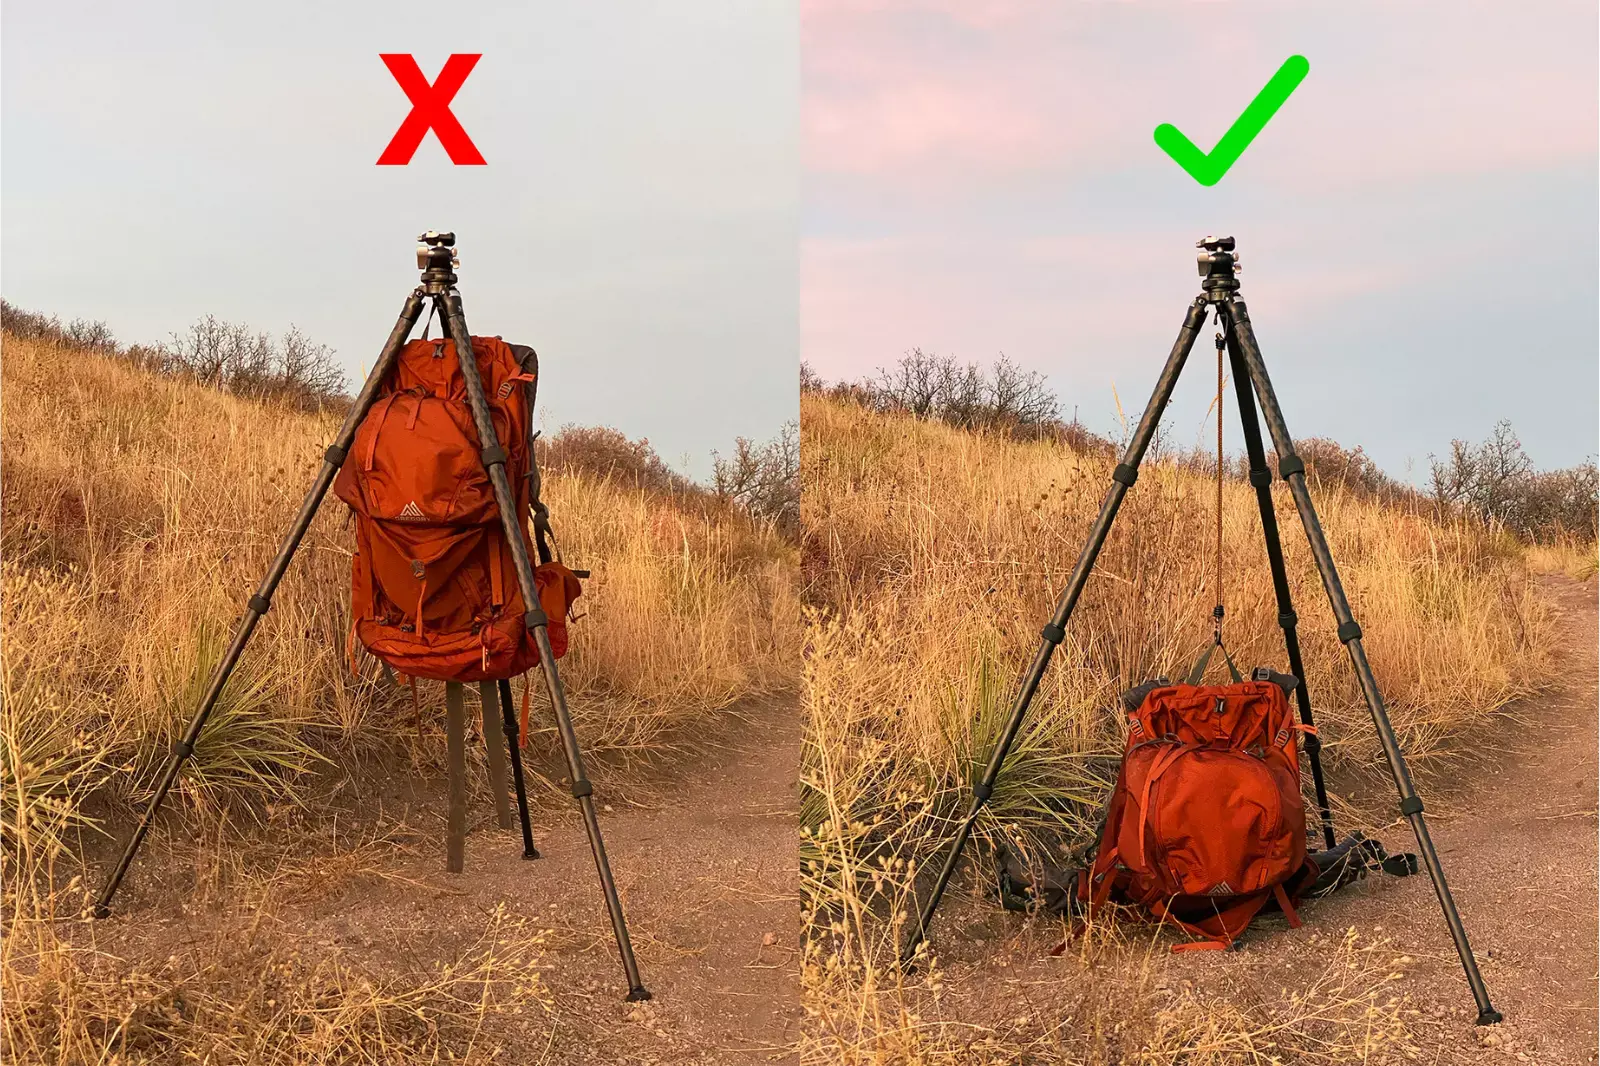 3. A tripod offers improved stability